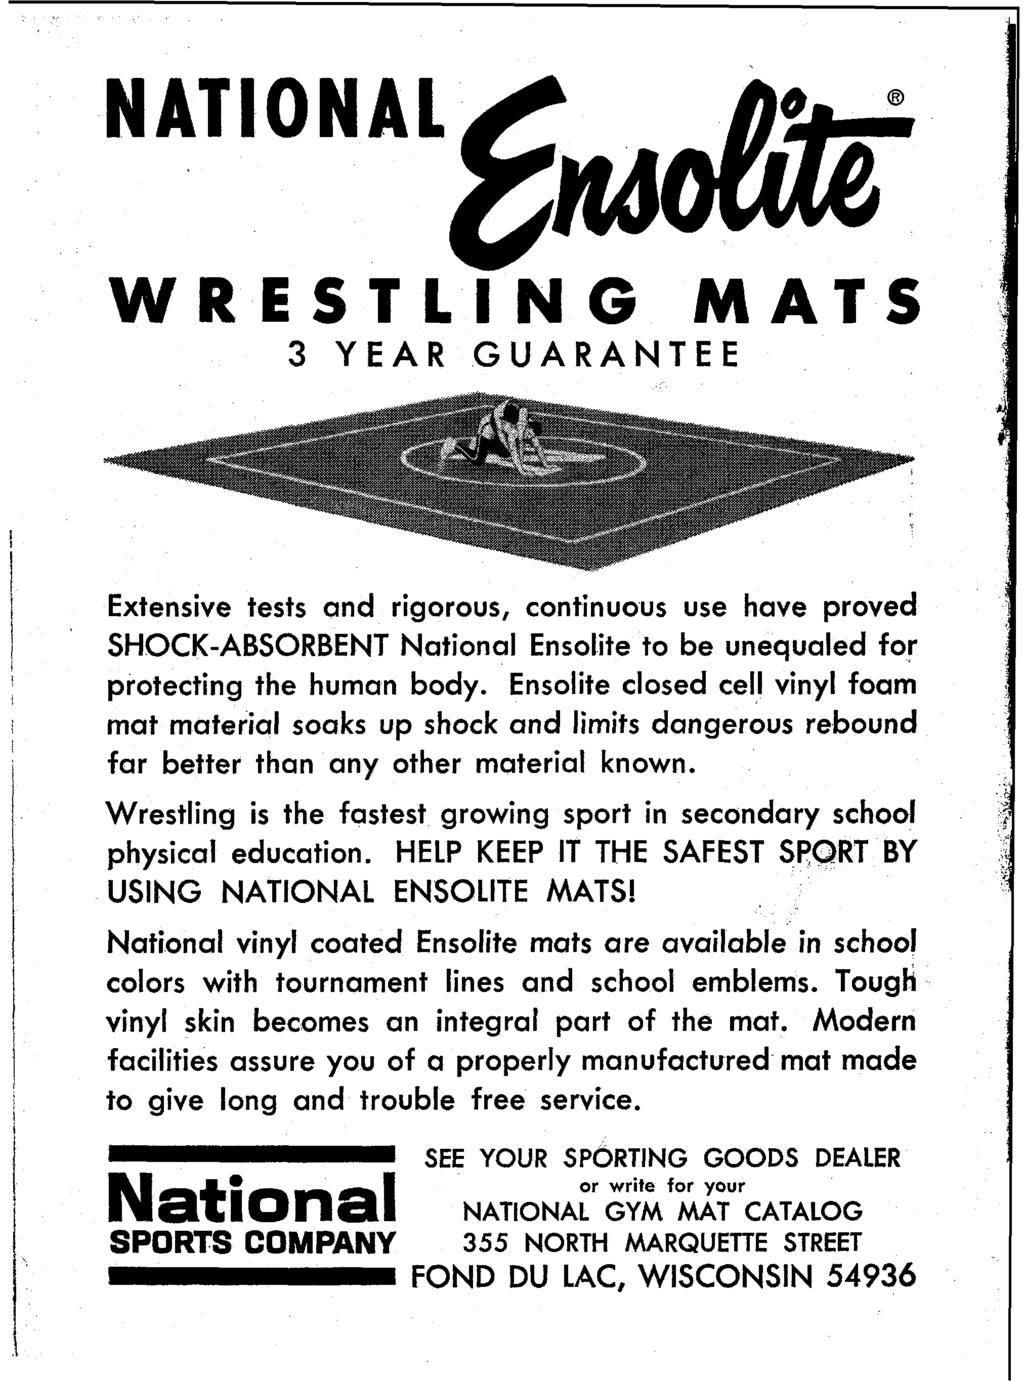 WRESTLING MATS 3 YEAR GUARANTEE Extensive tests and rigorous, continuous use have proved SHOCK-ABSORBENT National Ensolite to be unequaled for protecting the human body.